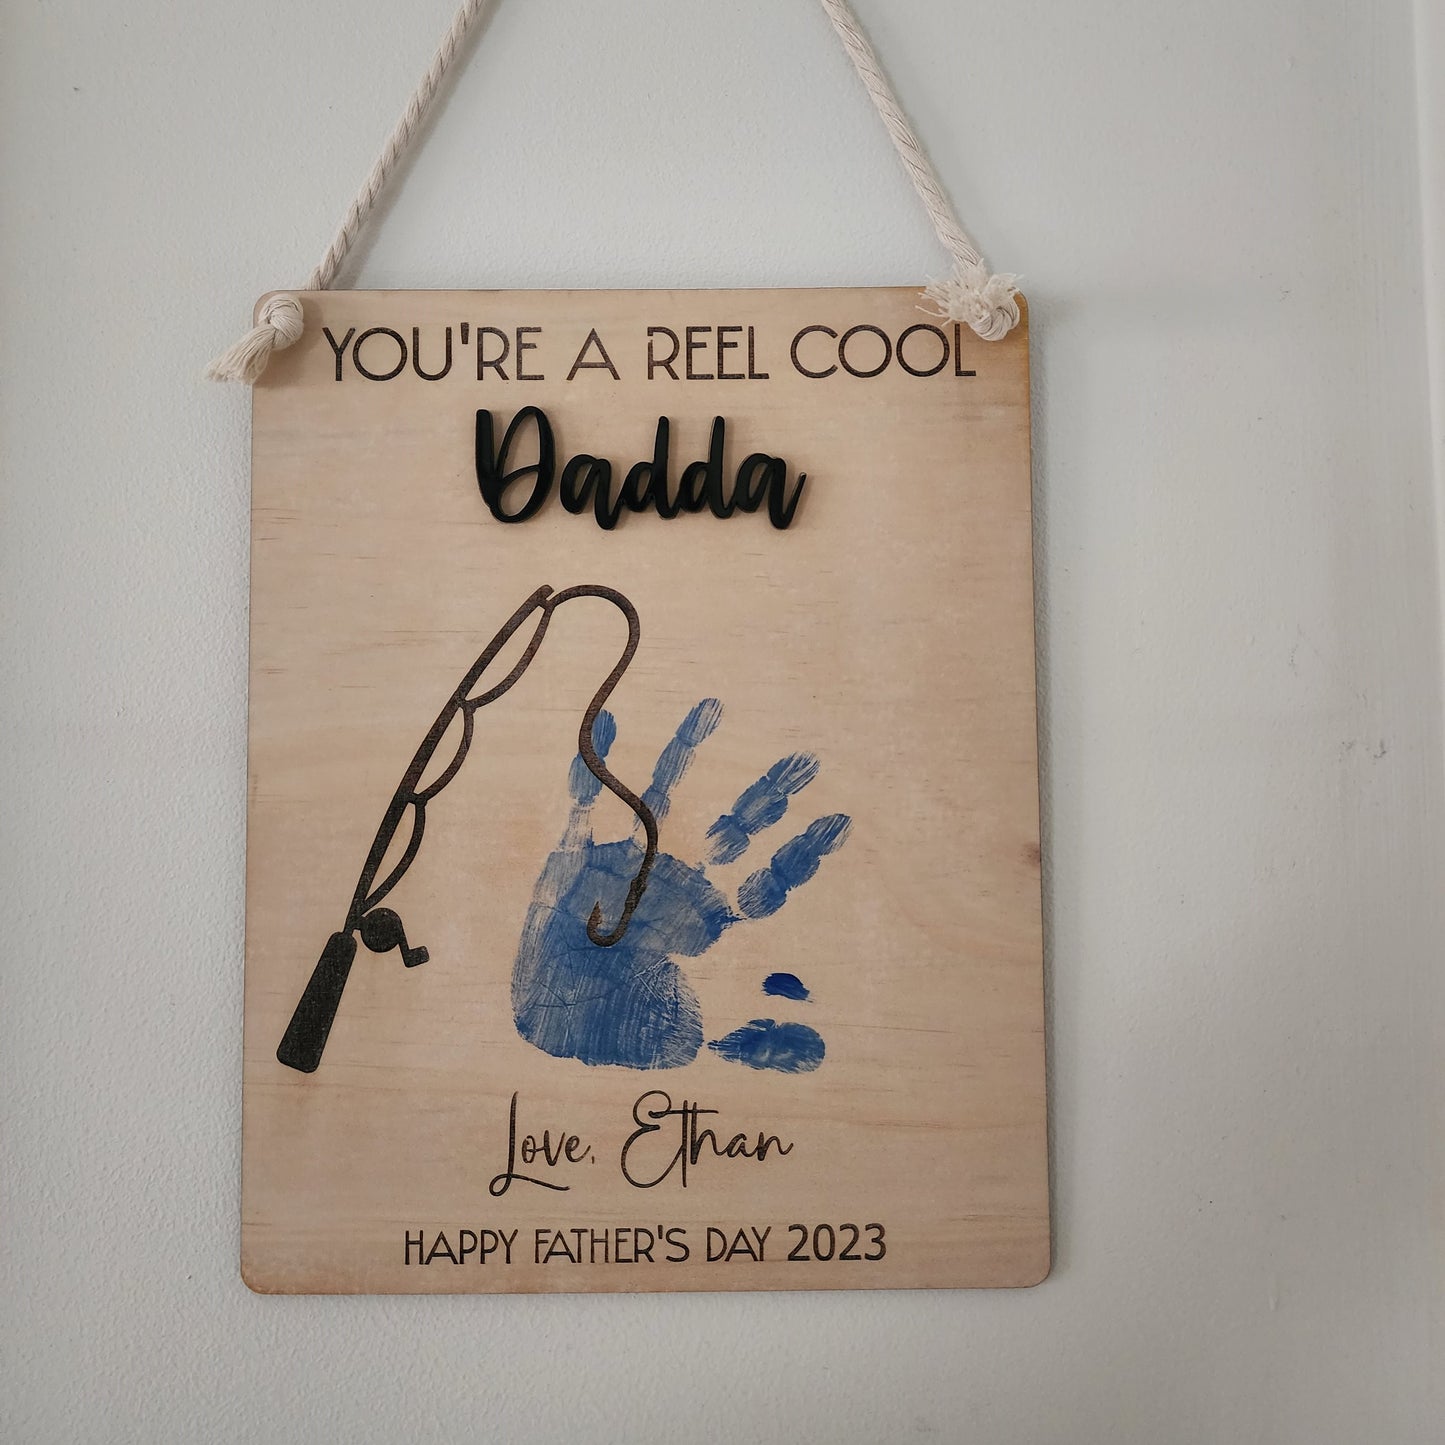 Personalised 'You're a Reel Cool' hanging wooden plaque